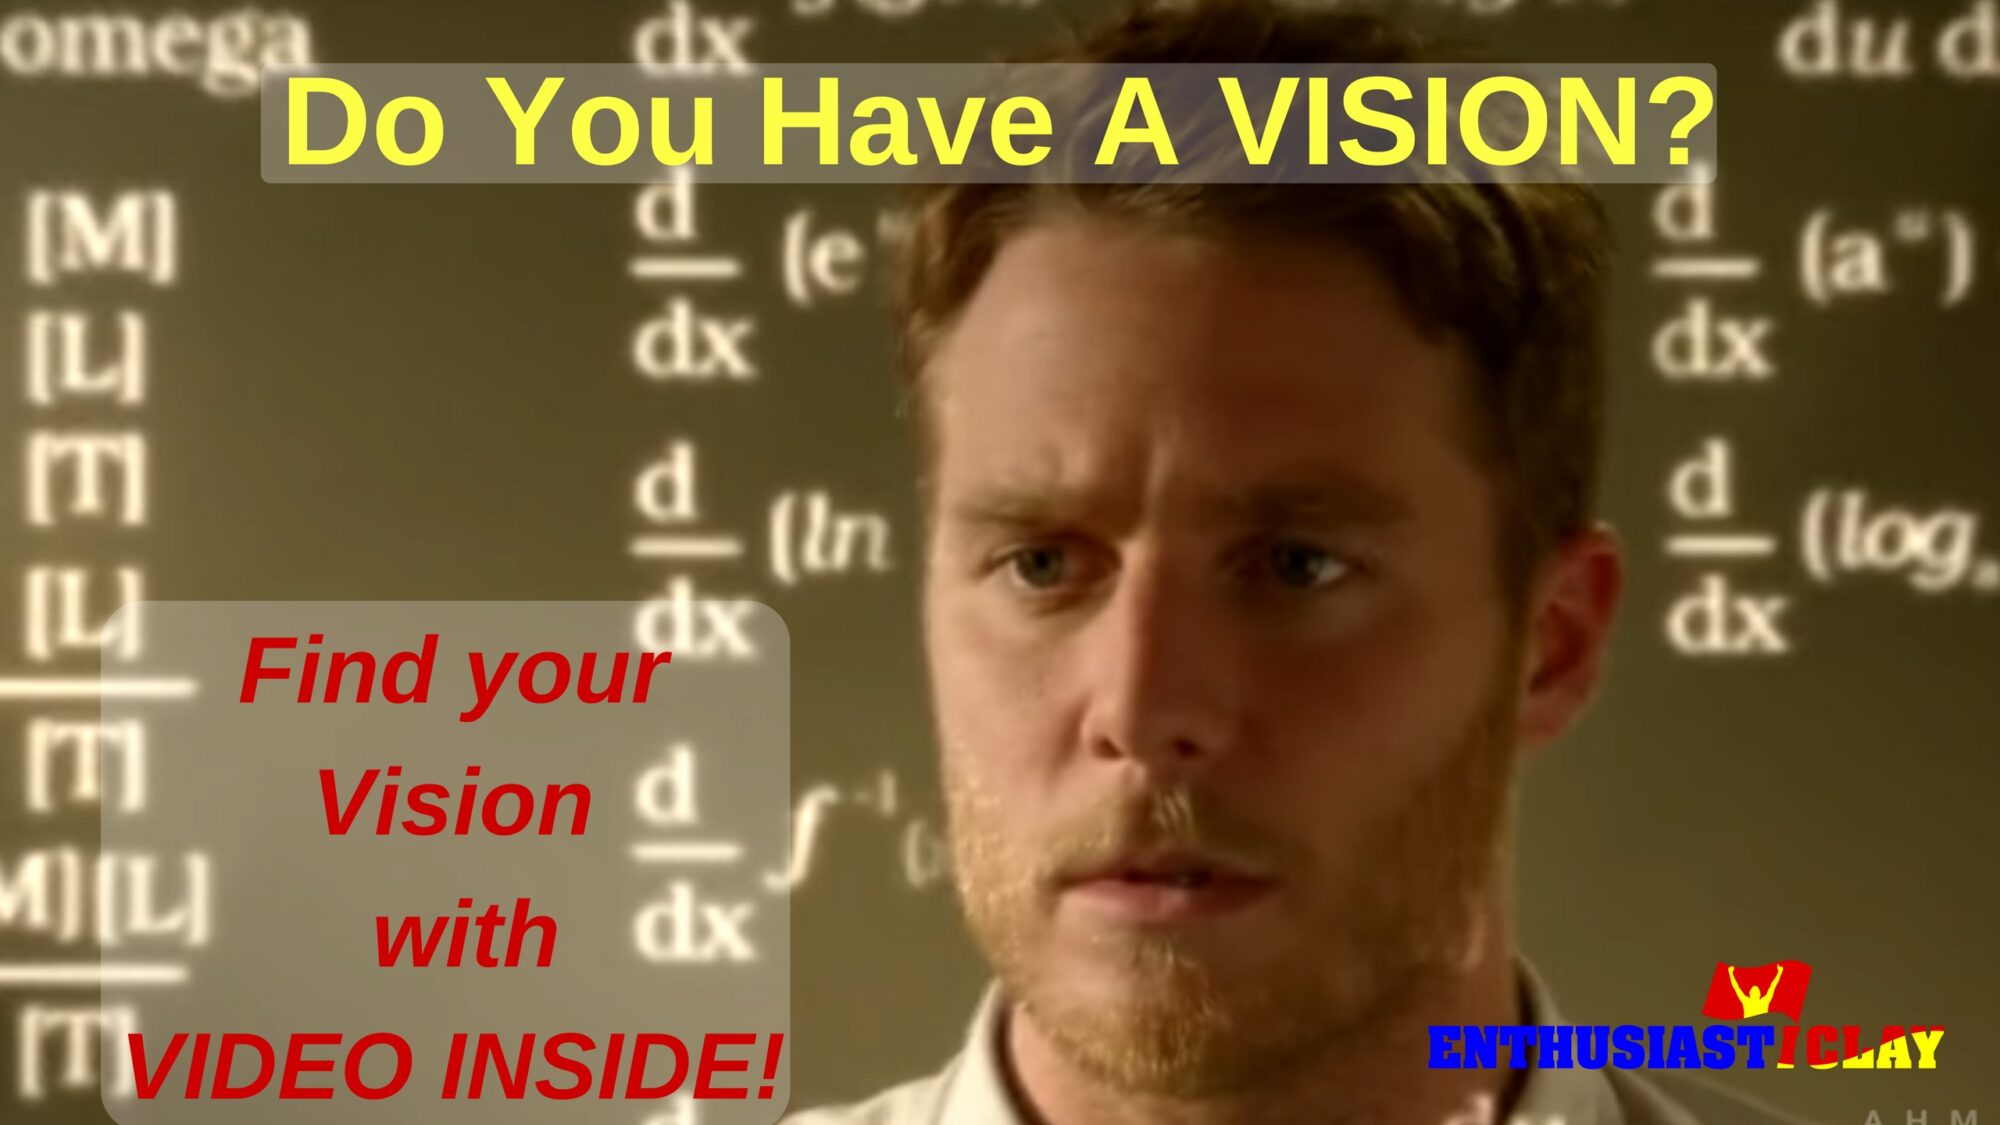 Do You Have A Vision?